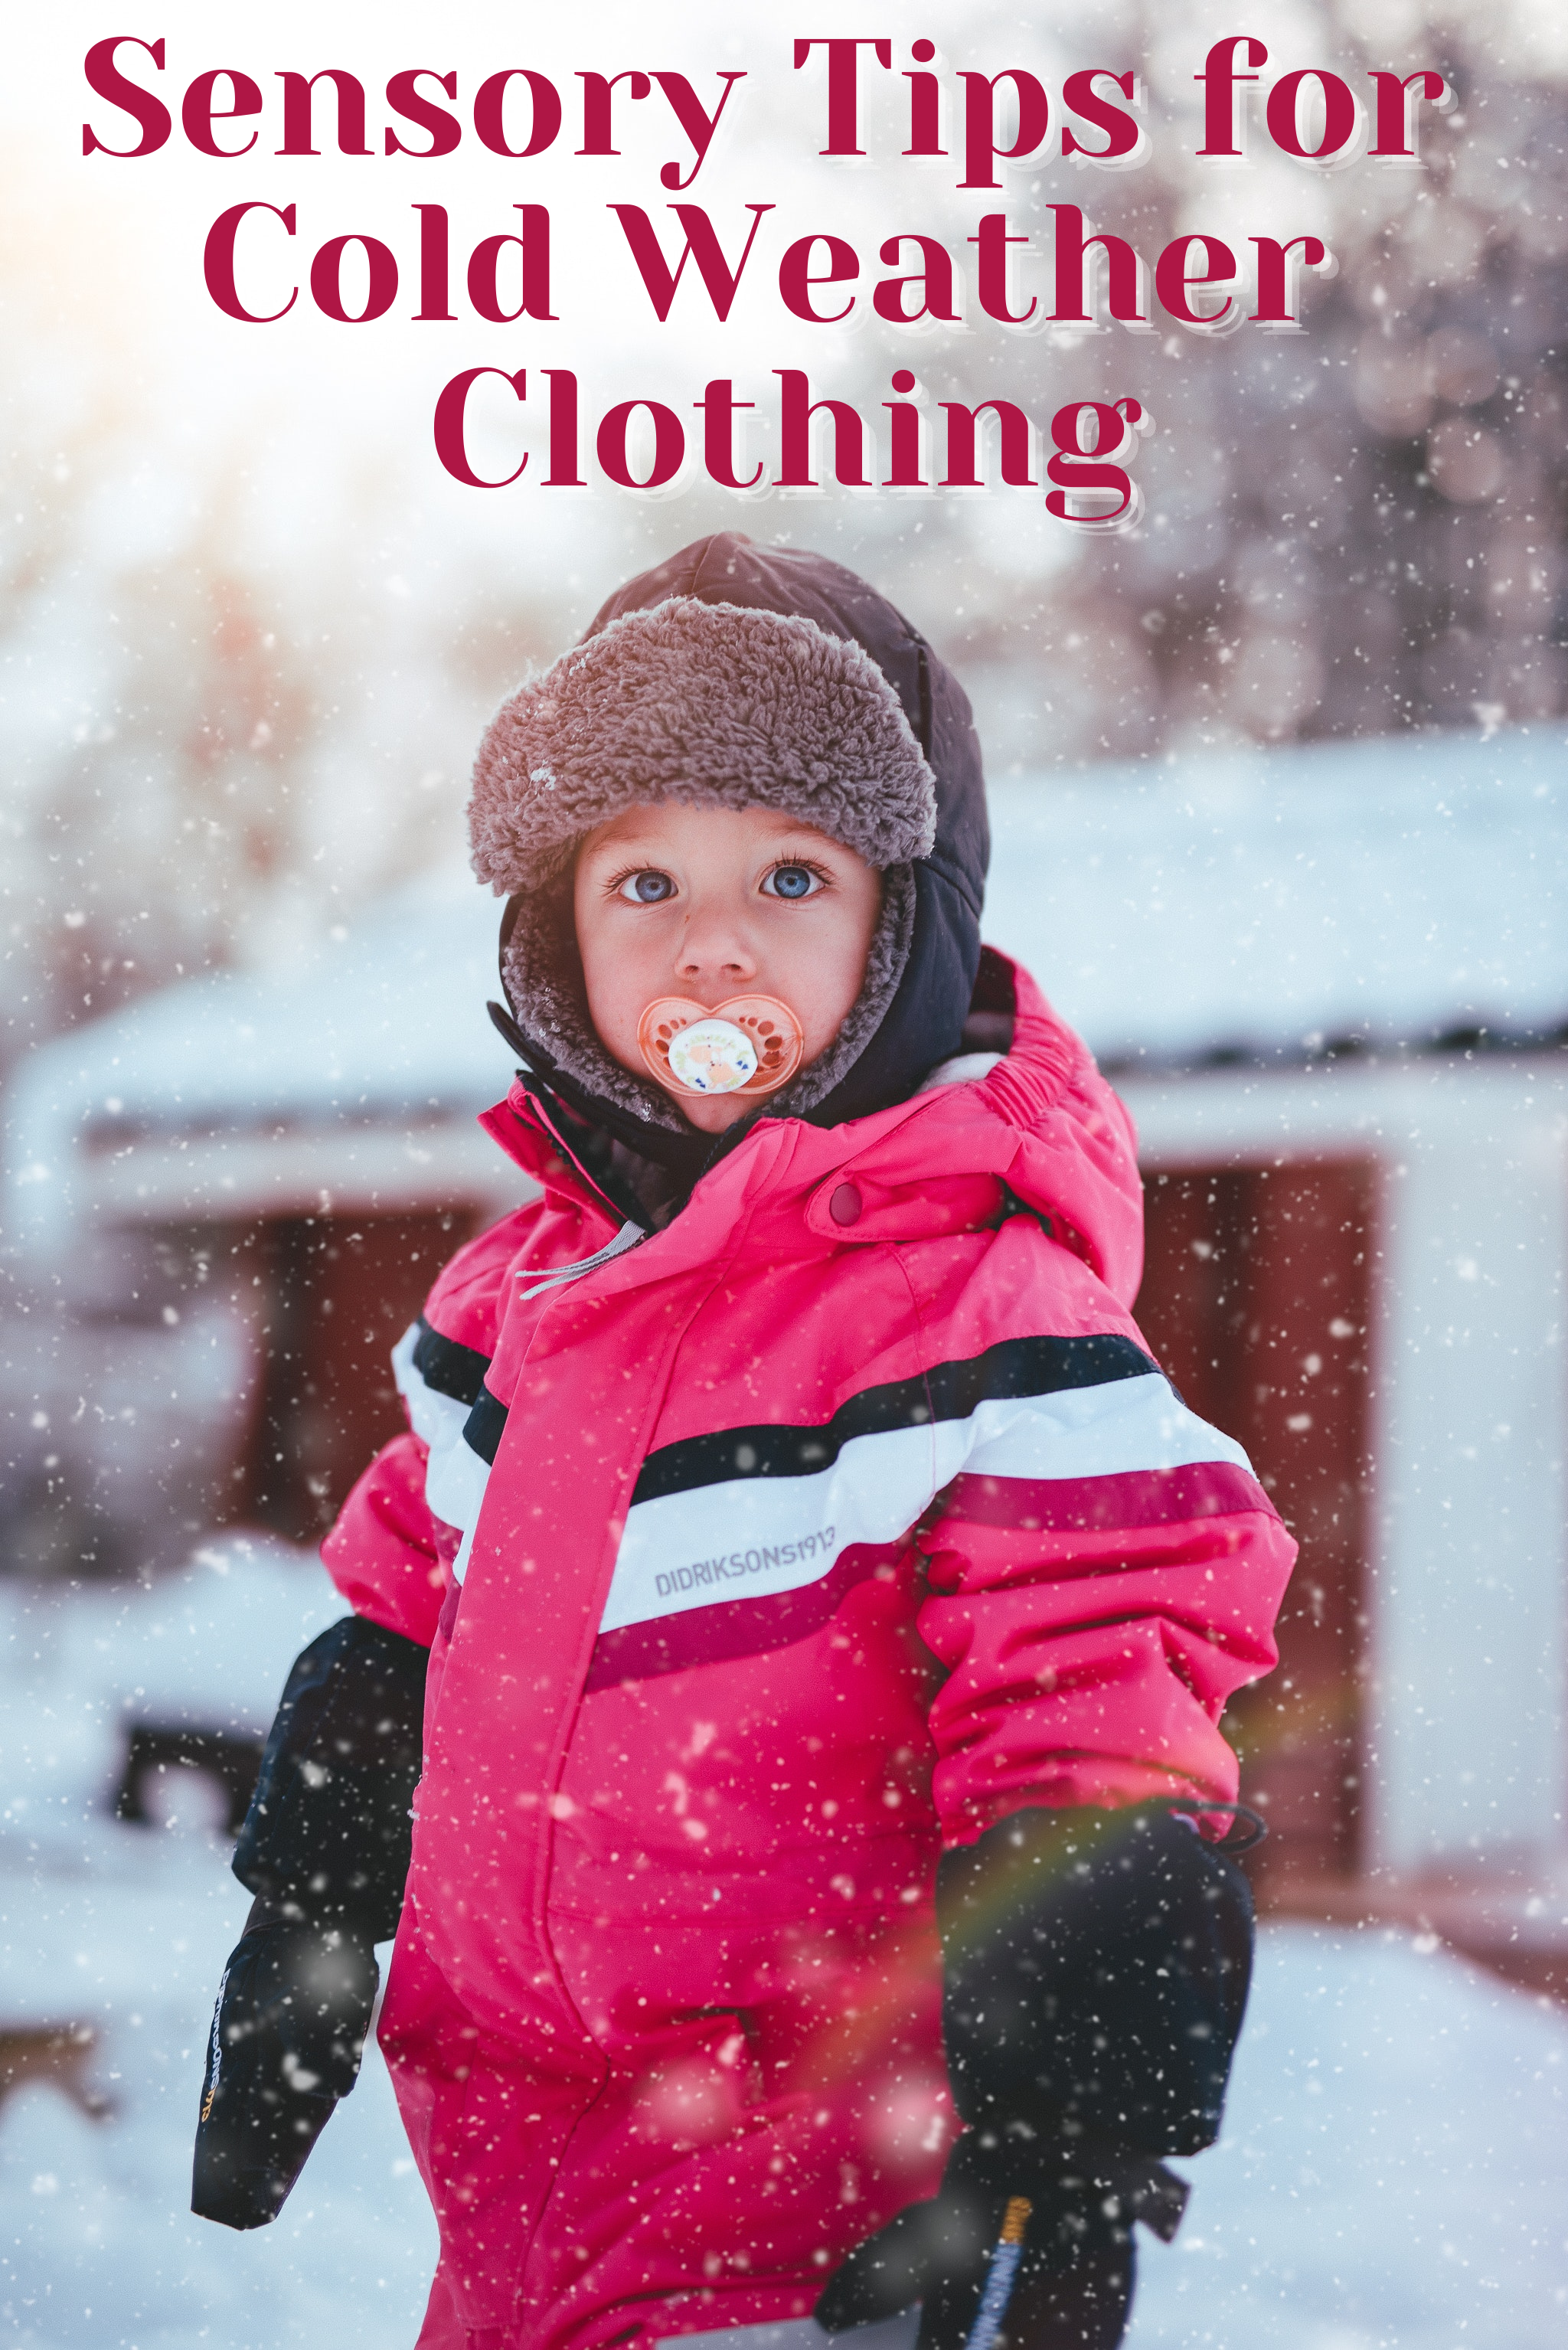 Sensory Tips for Cold Weather Clothing